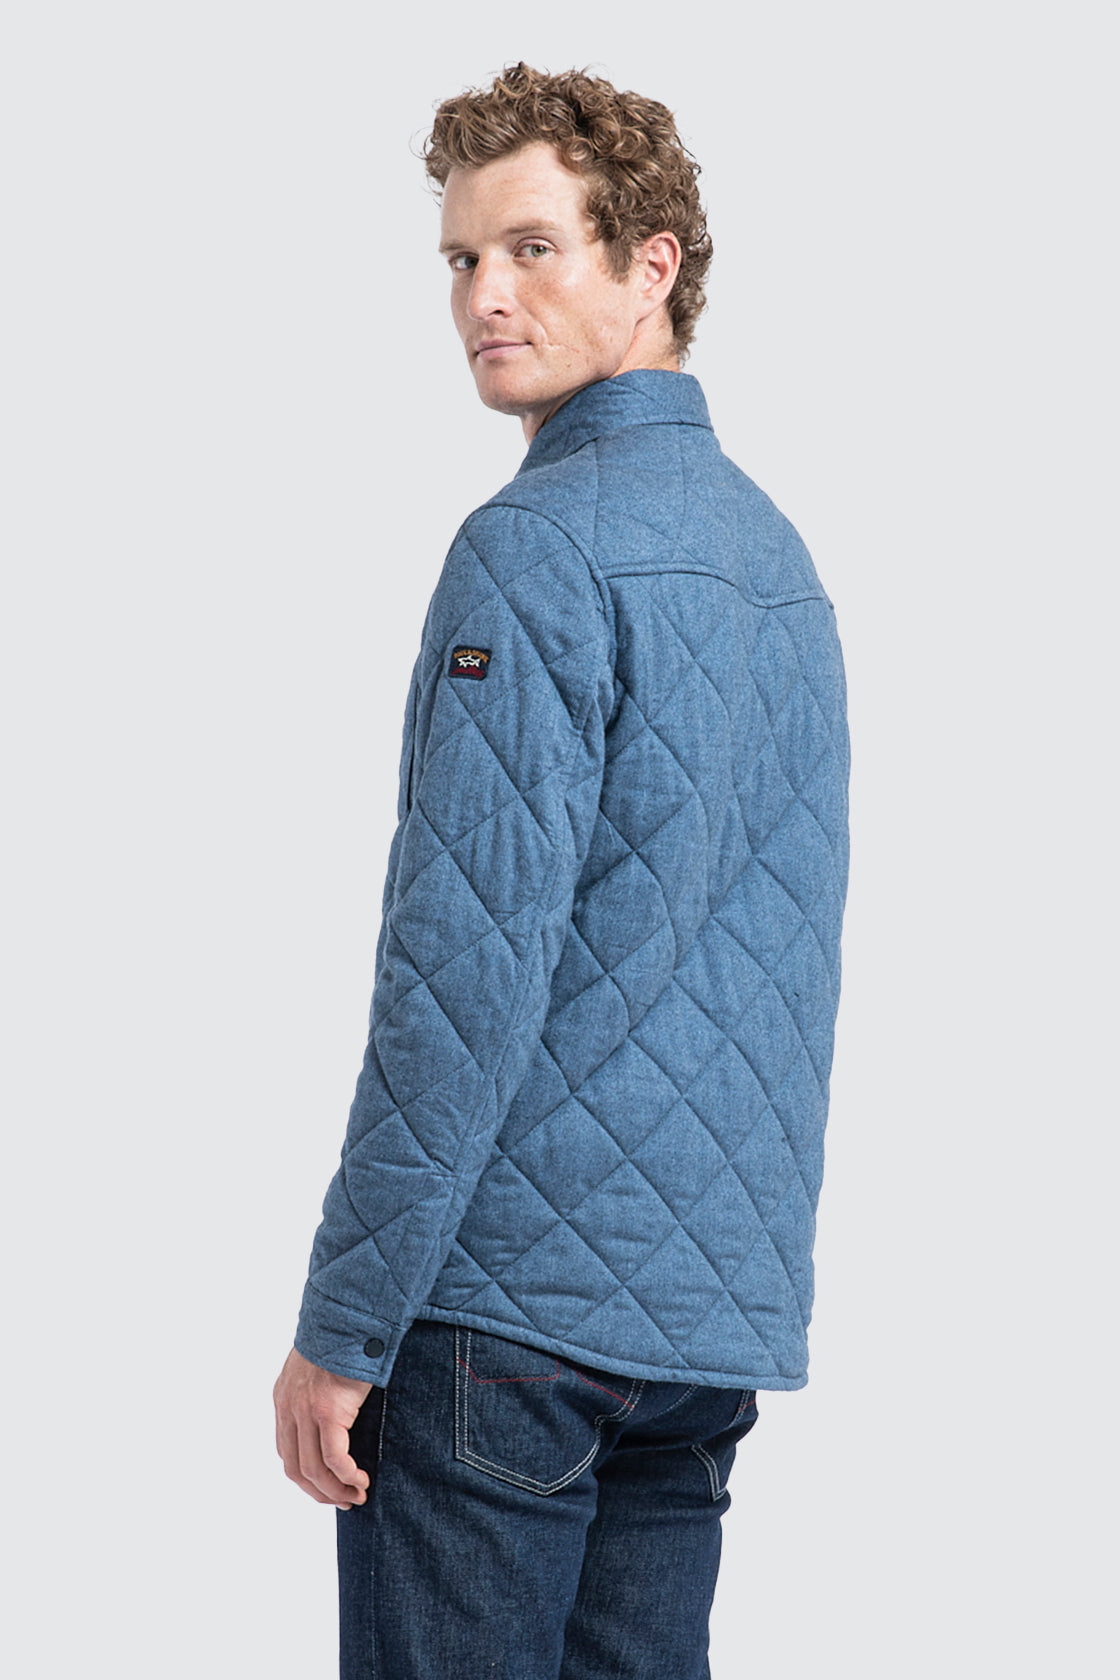 Paul & Shark Quilted Shaket